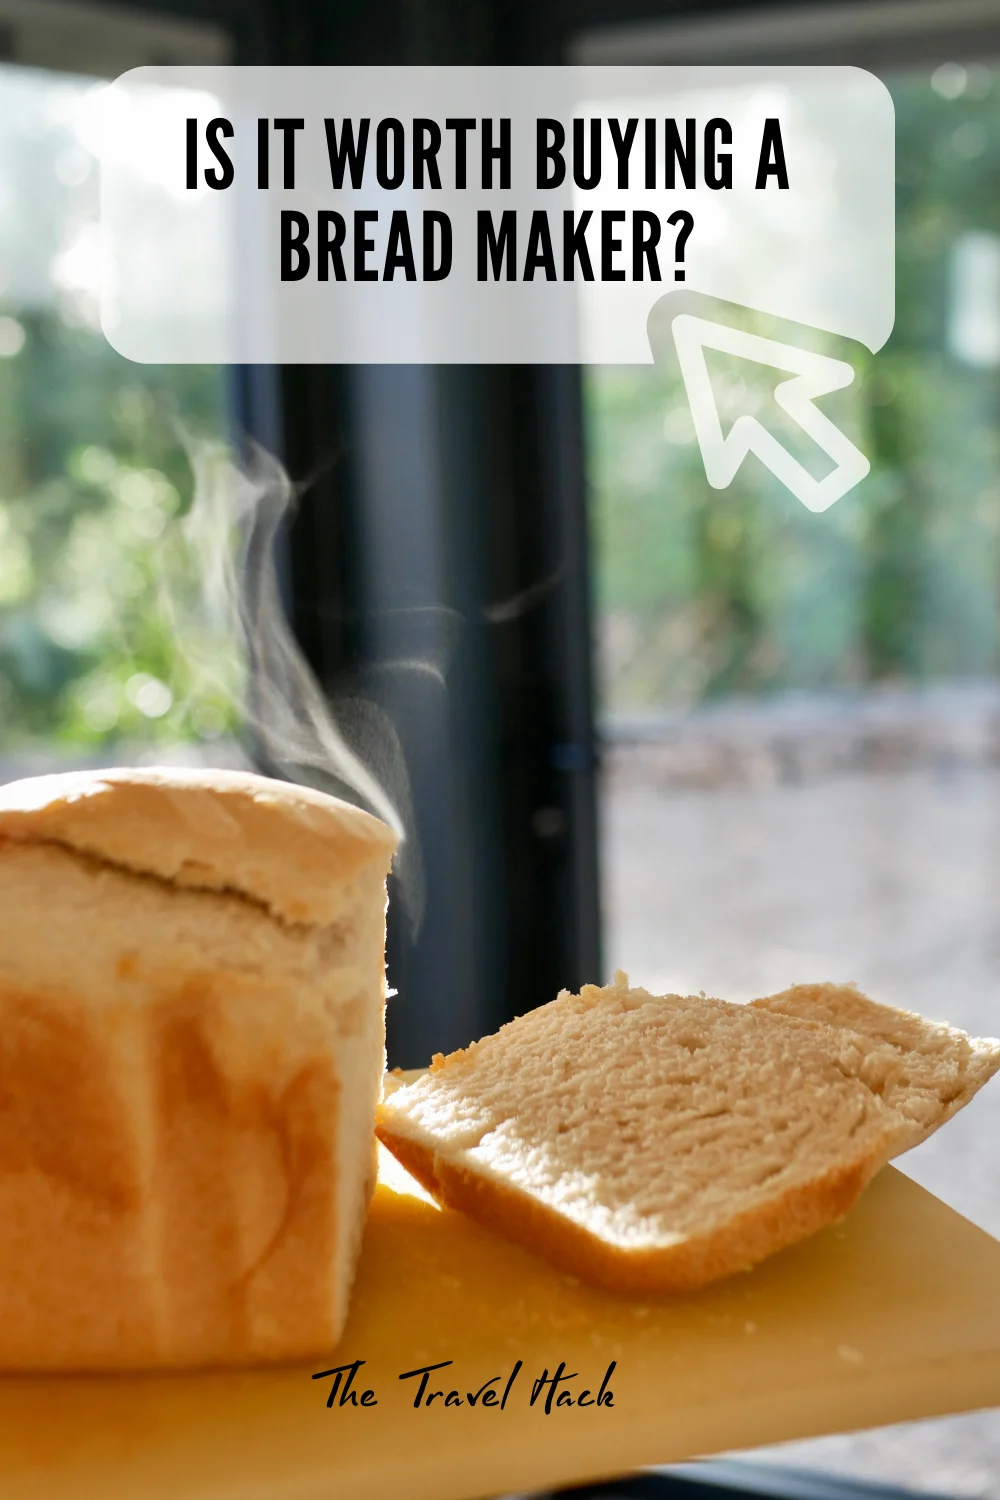 https://thetravelhack.com/wp-content/uploads/2021/03/Is-it-worth-buying-a-bread-maker-The-Travel-Hack-Lifestyle-Blog.png.webp